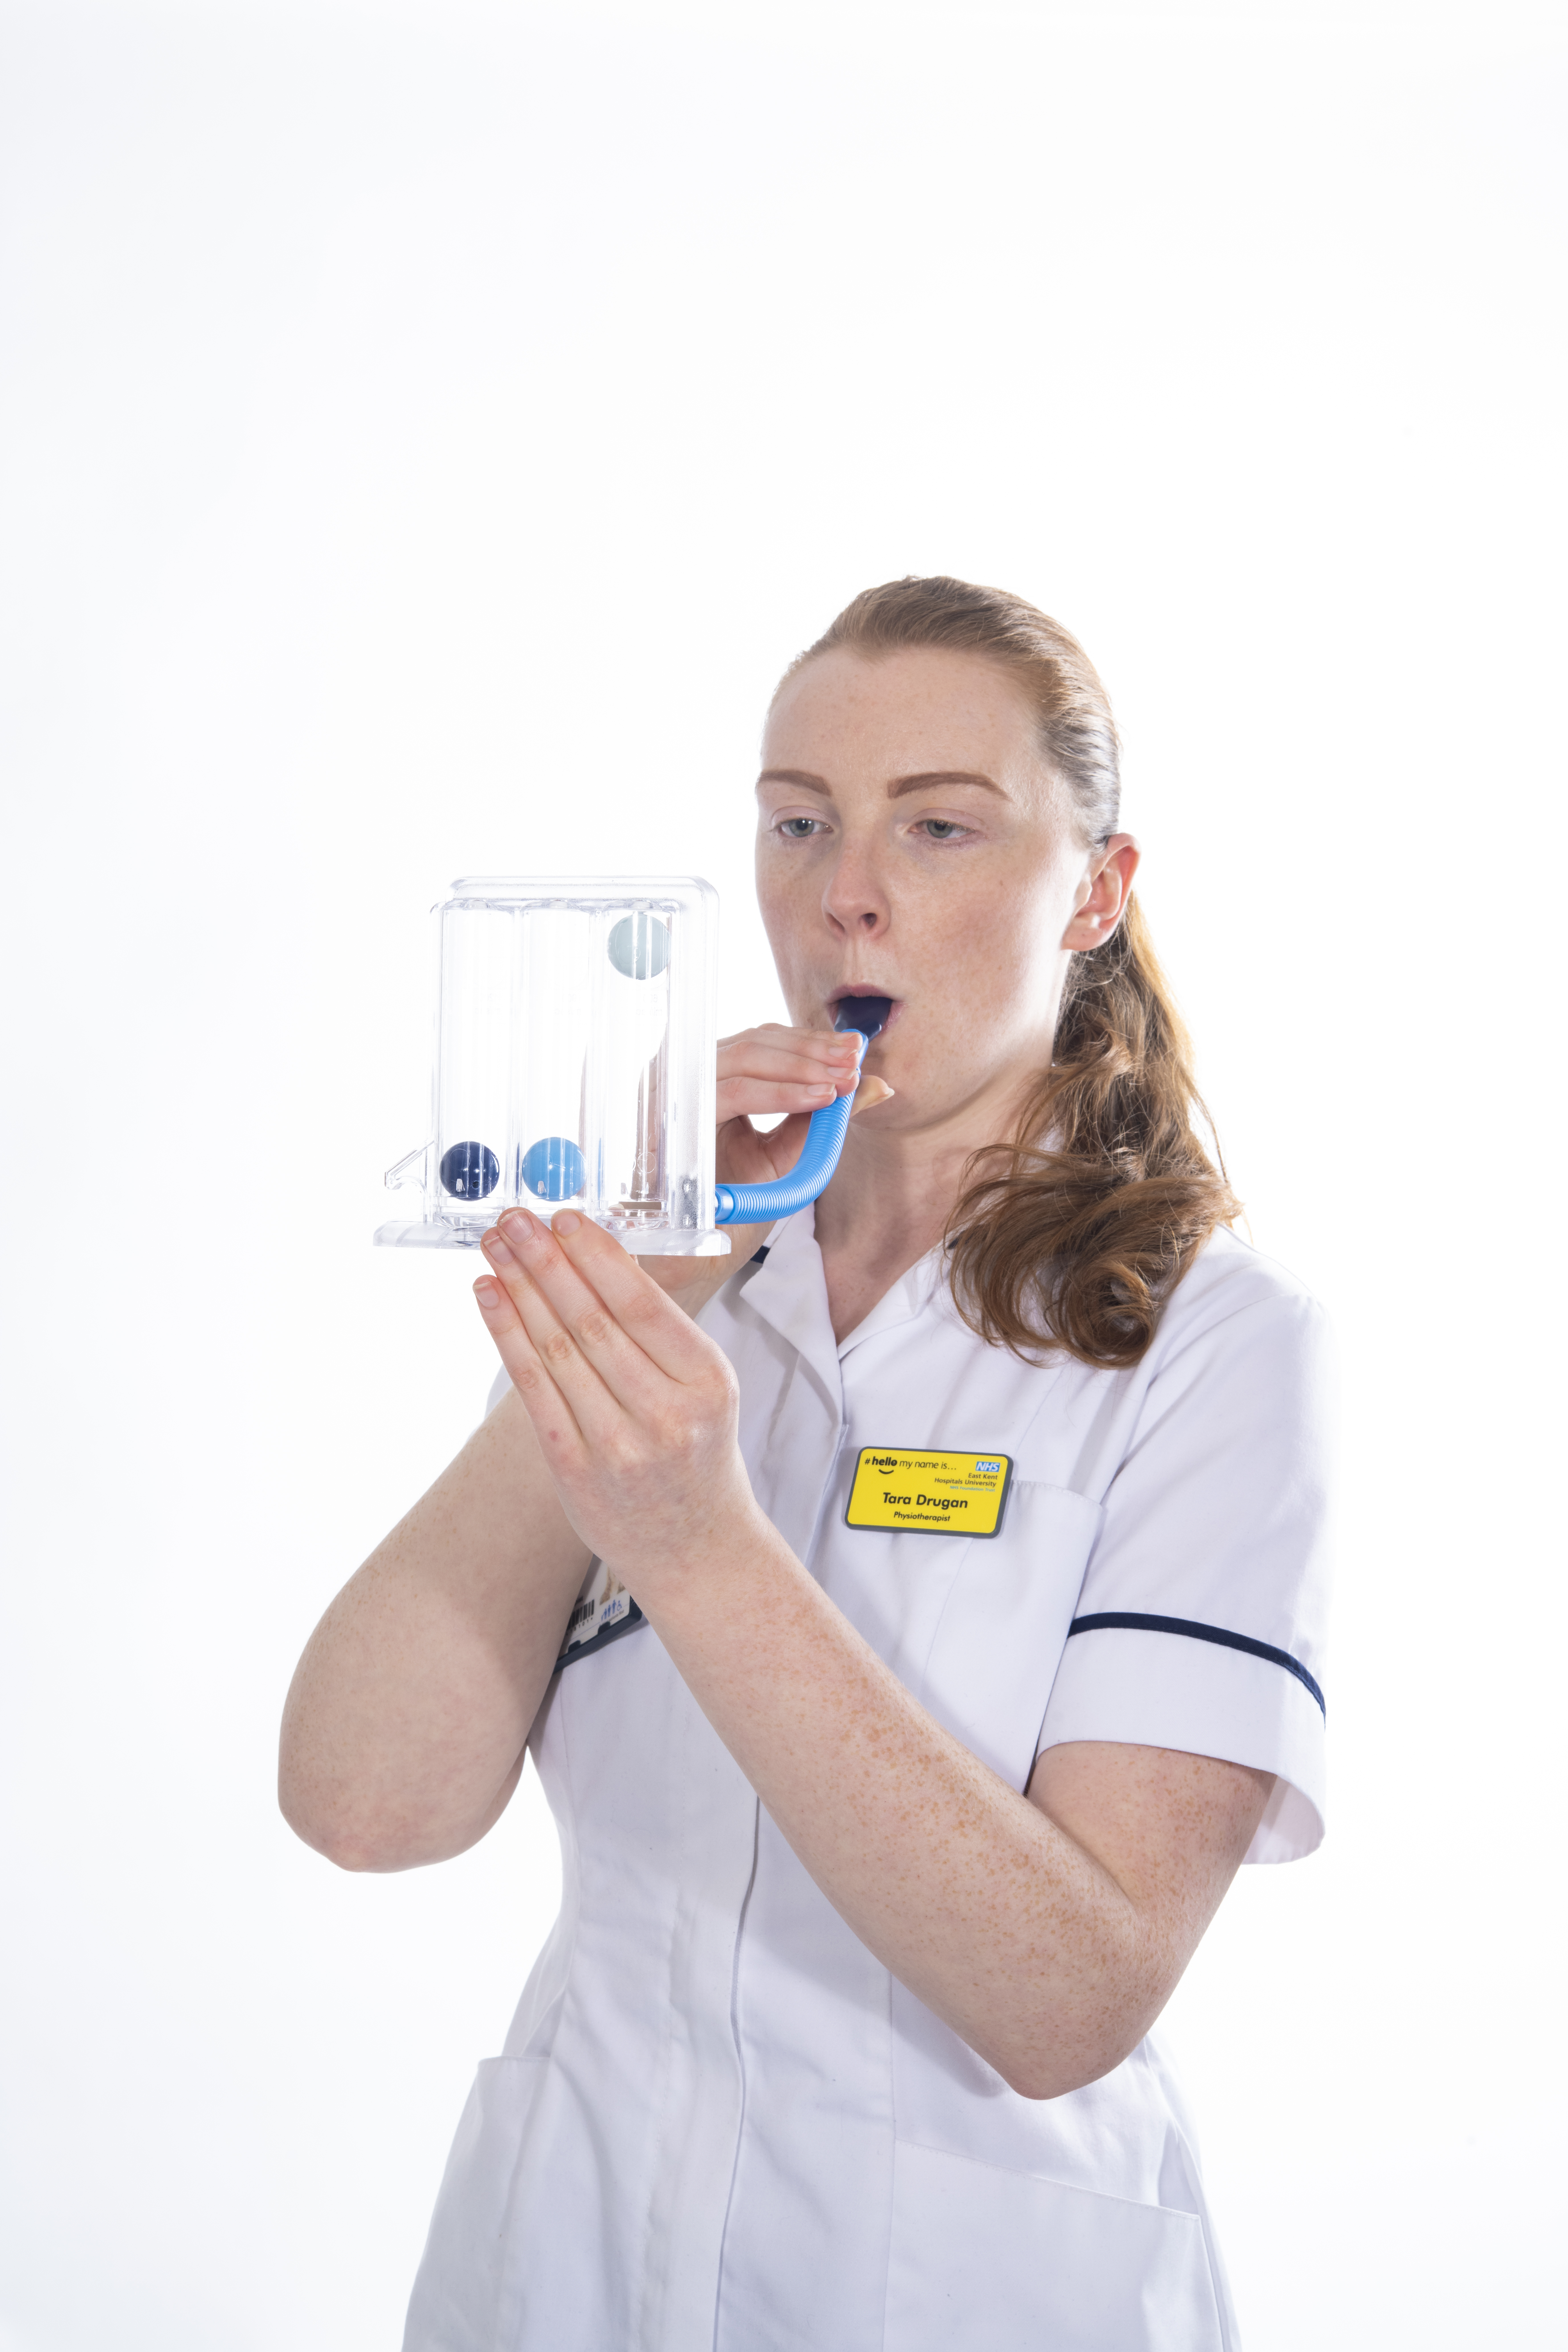 Blow into the incentive spirometer and make one ball rise